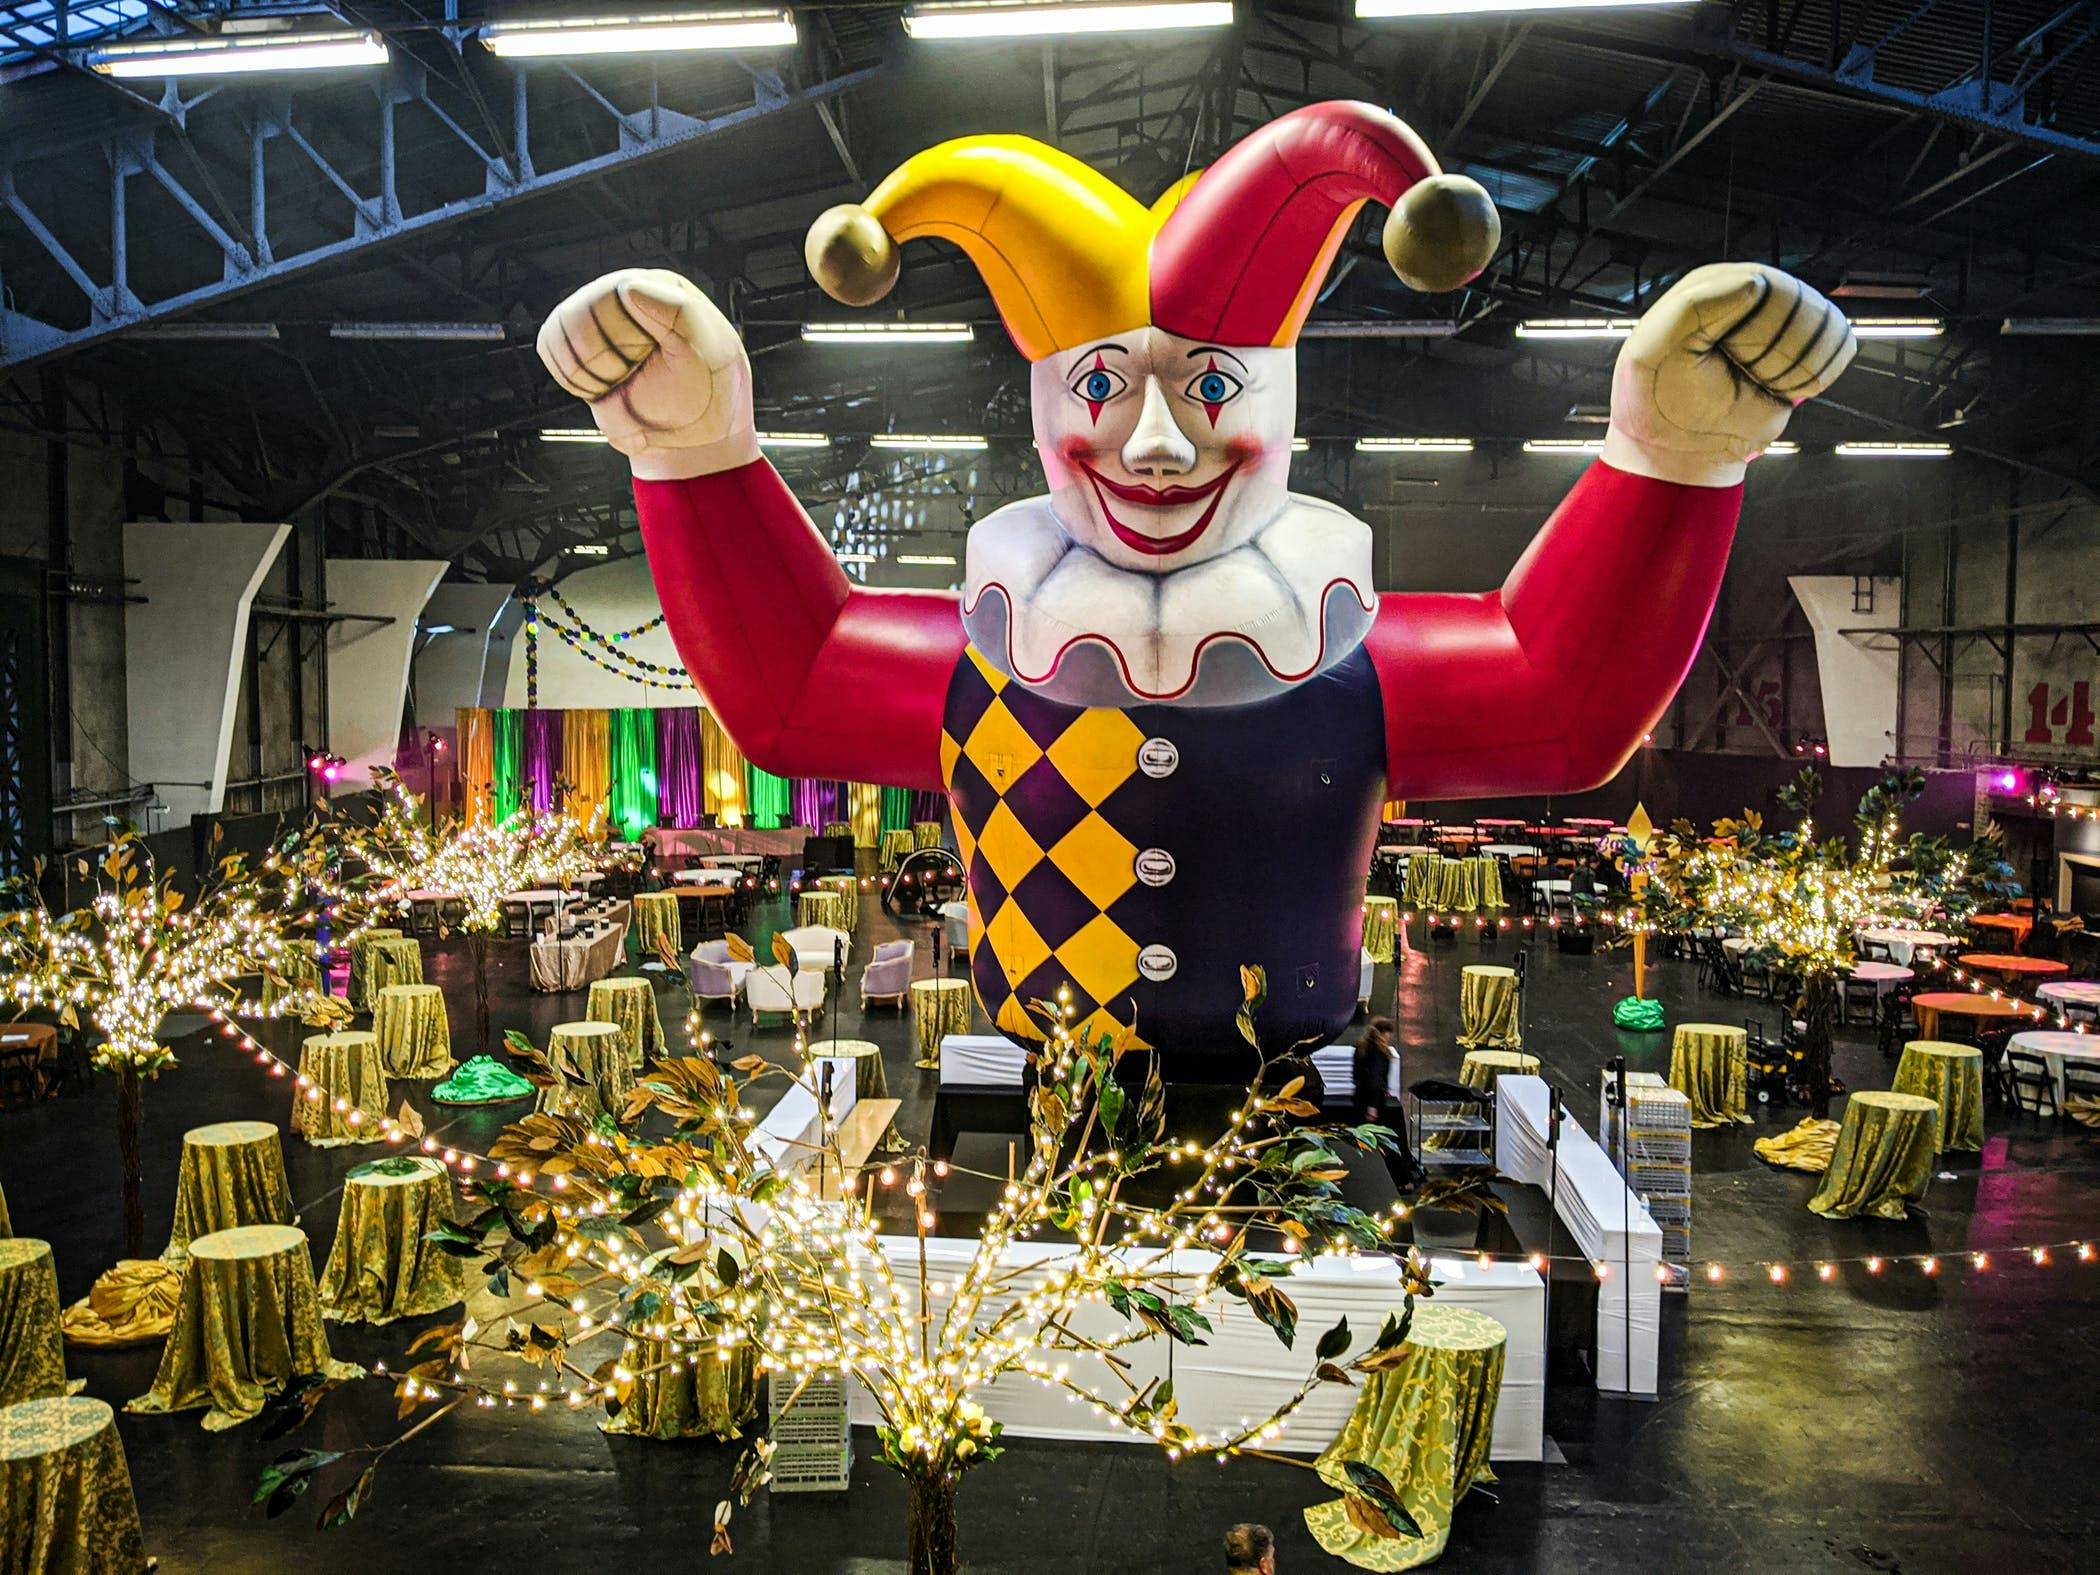 Mardi Gras Themed Holiday Party With Giant Blow Up Jester Doll | PartySlate